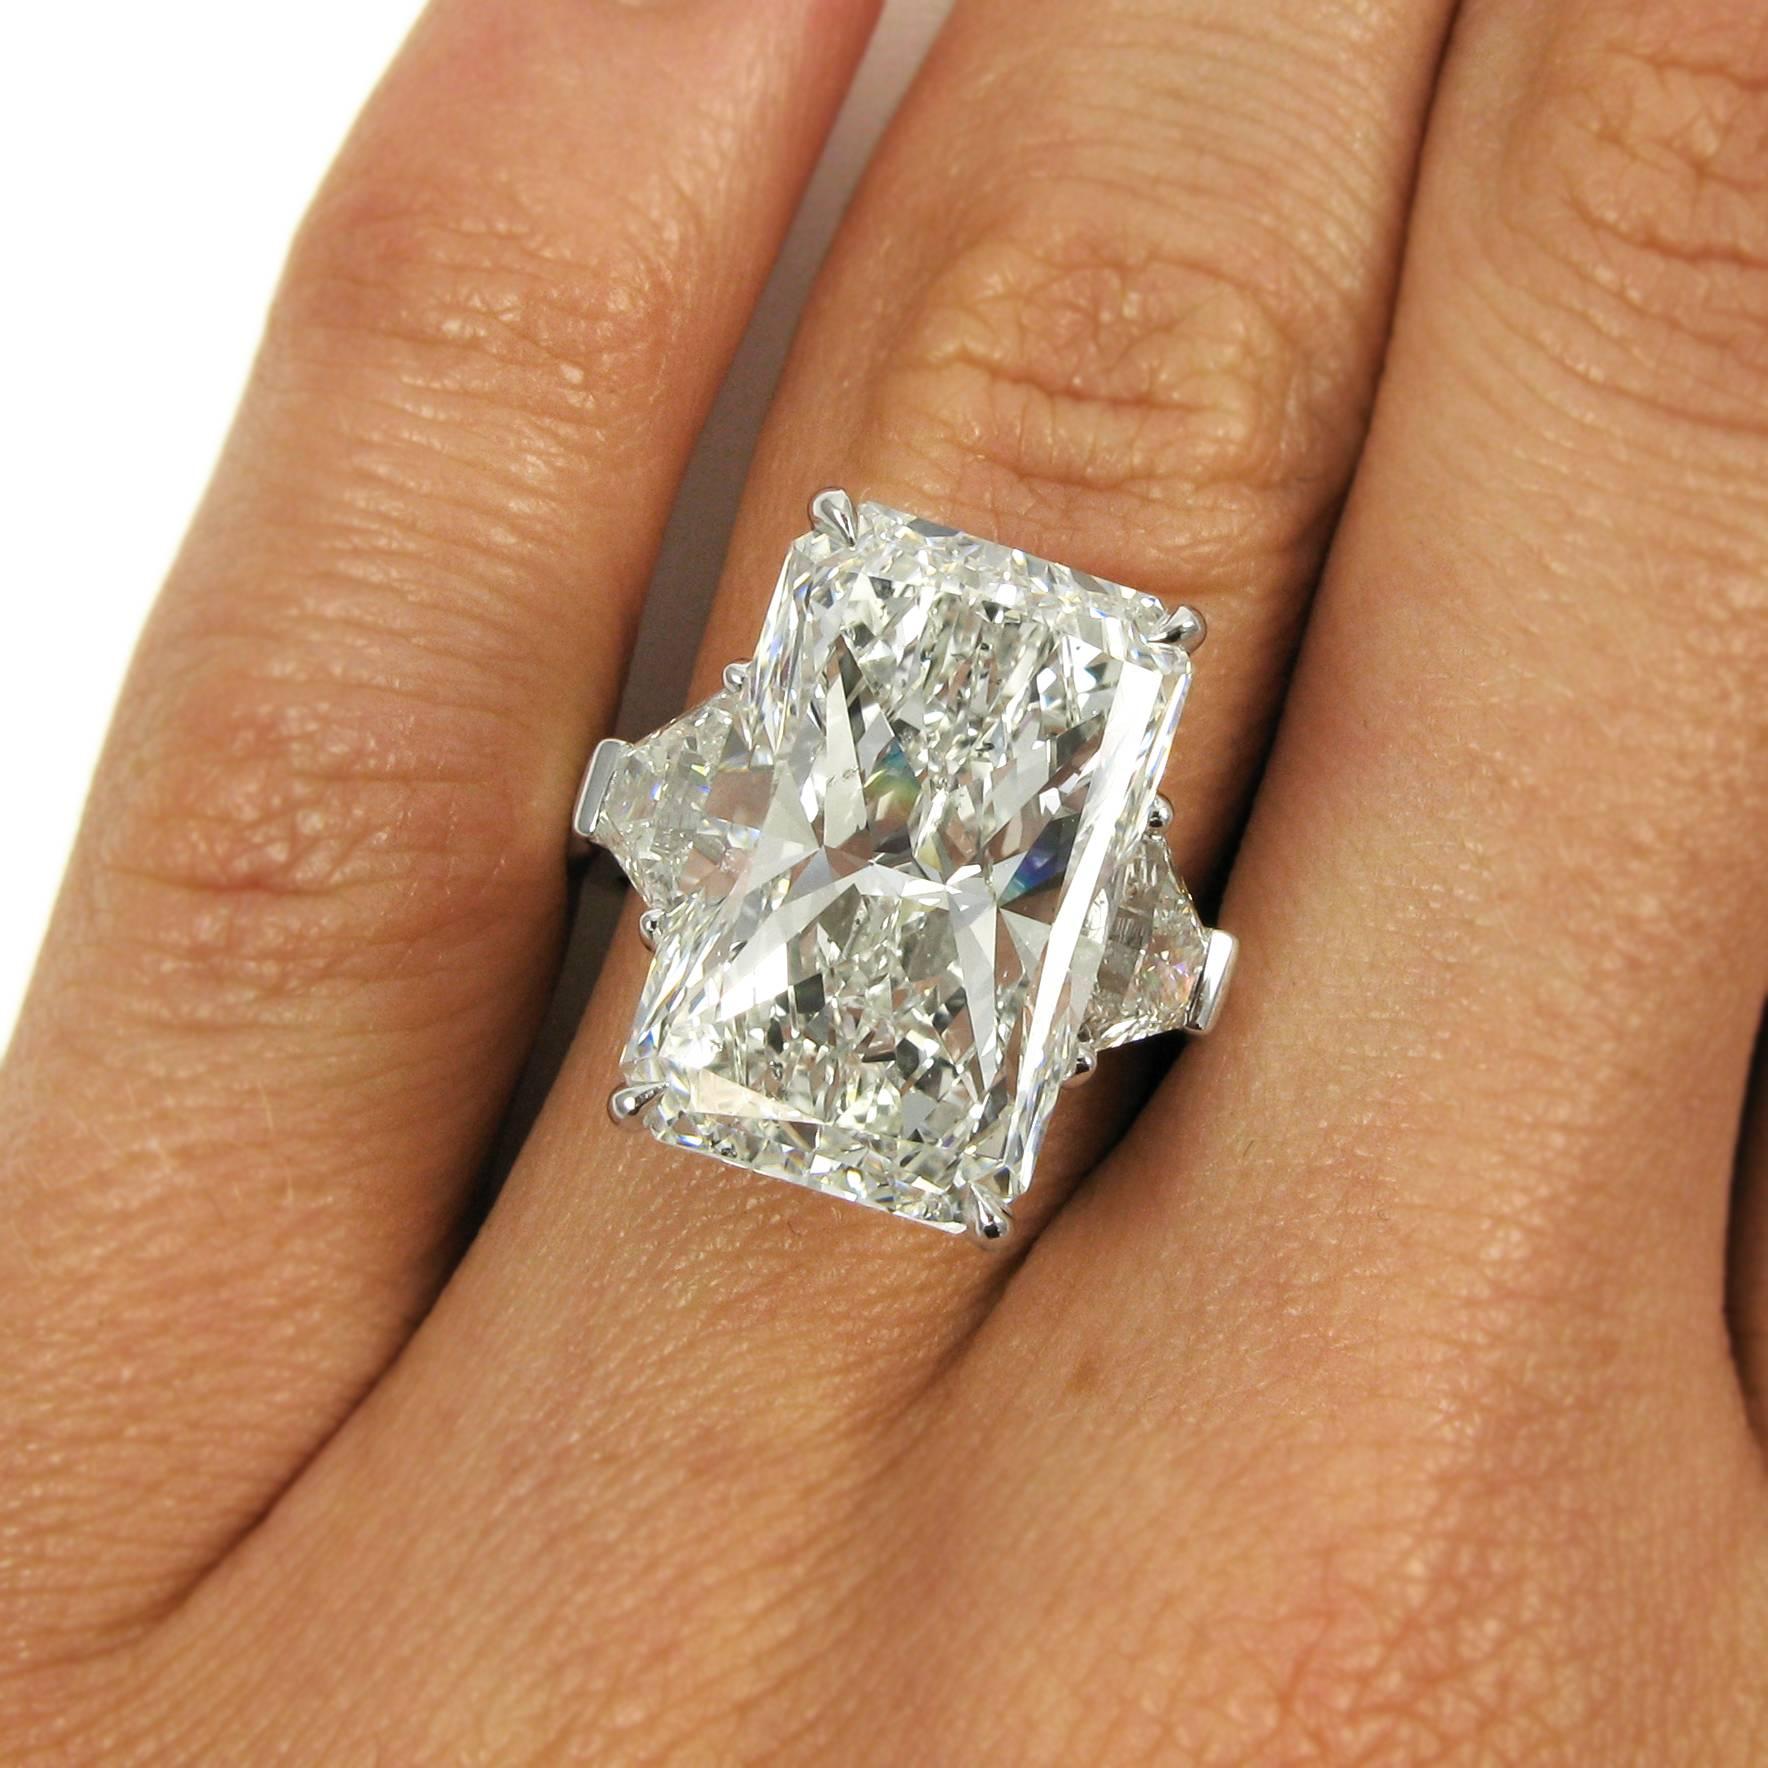 This impressive diamond ring is a unique 12.25 carat elongated radiant-cut diamond flanked by two trapezoid brilliant-cut diamonds in a custom hand-made platinum setting. The center stone has I color and SI2 clarity, while the two trapezoids total